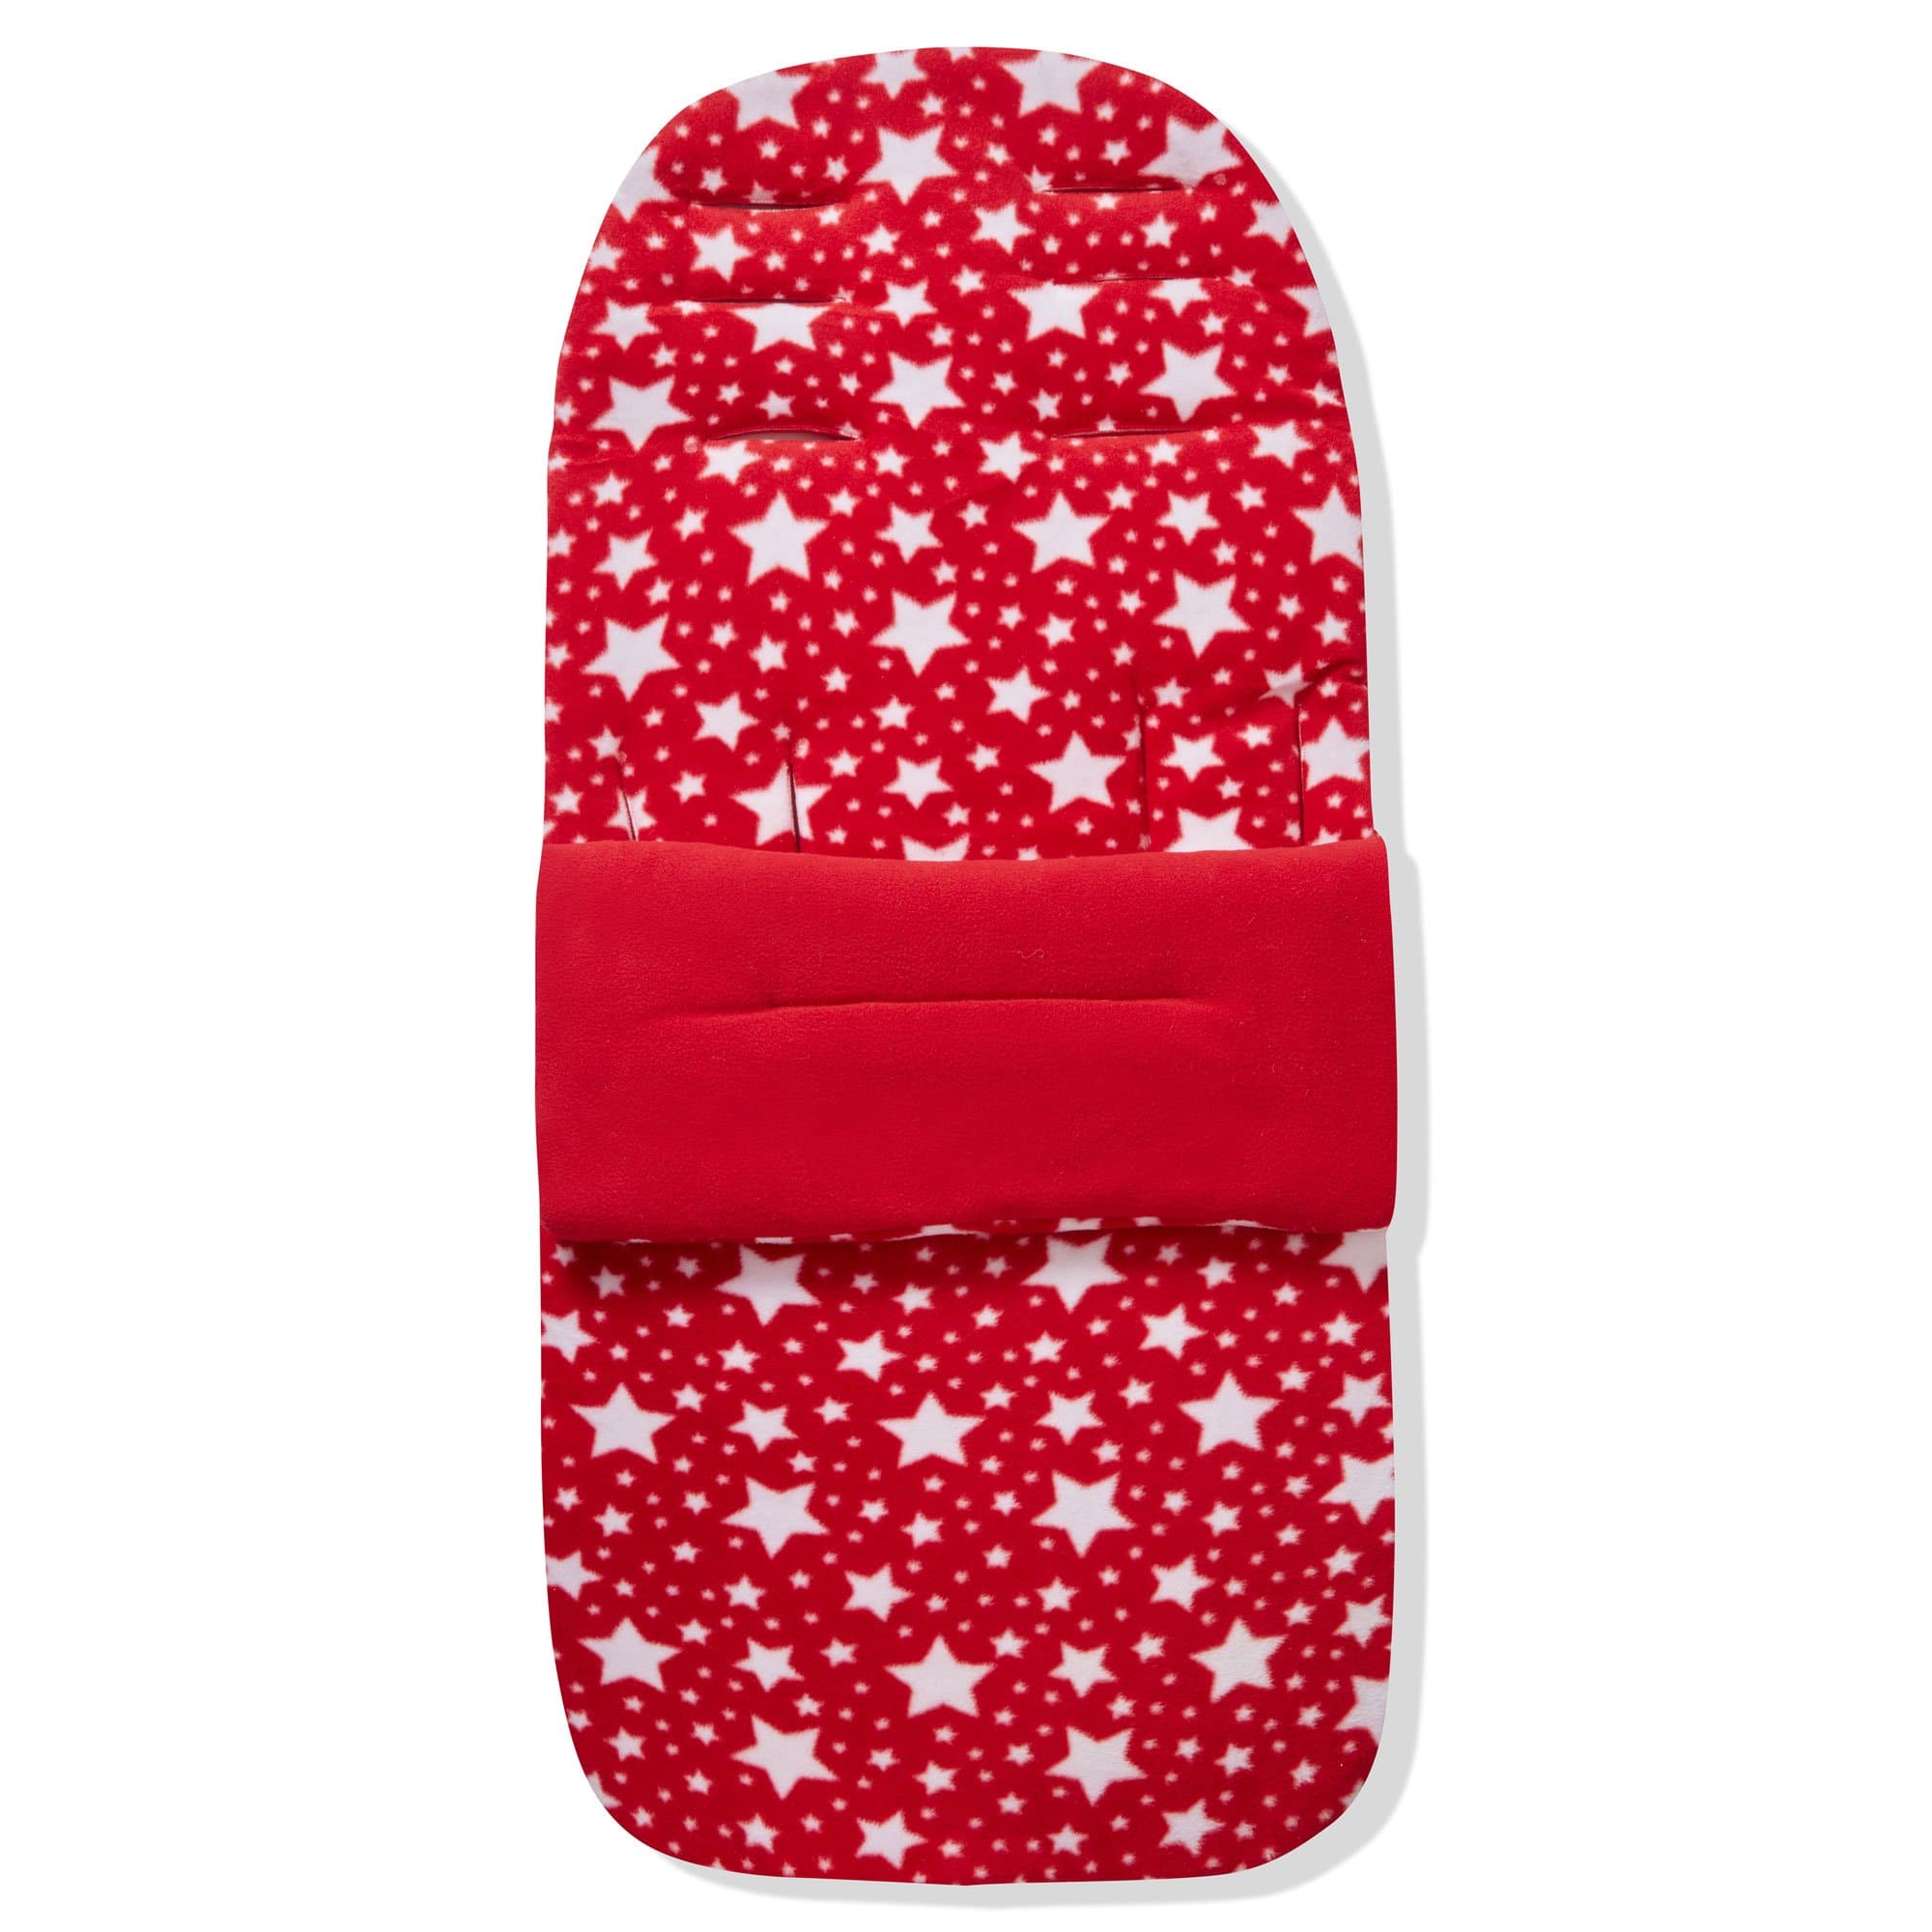 Fleece Footmuff / Cosy Toes Compatible with Babybus - Red Star / Fits All Models | For Your Little One